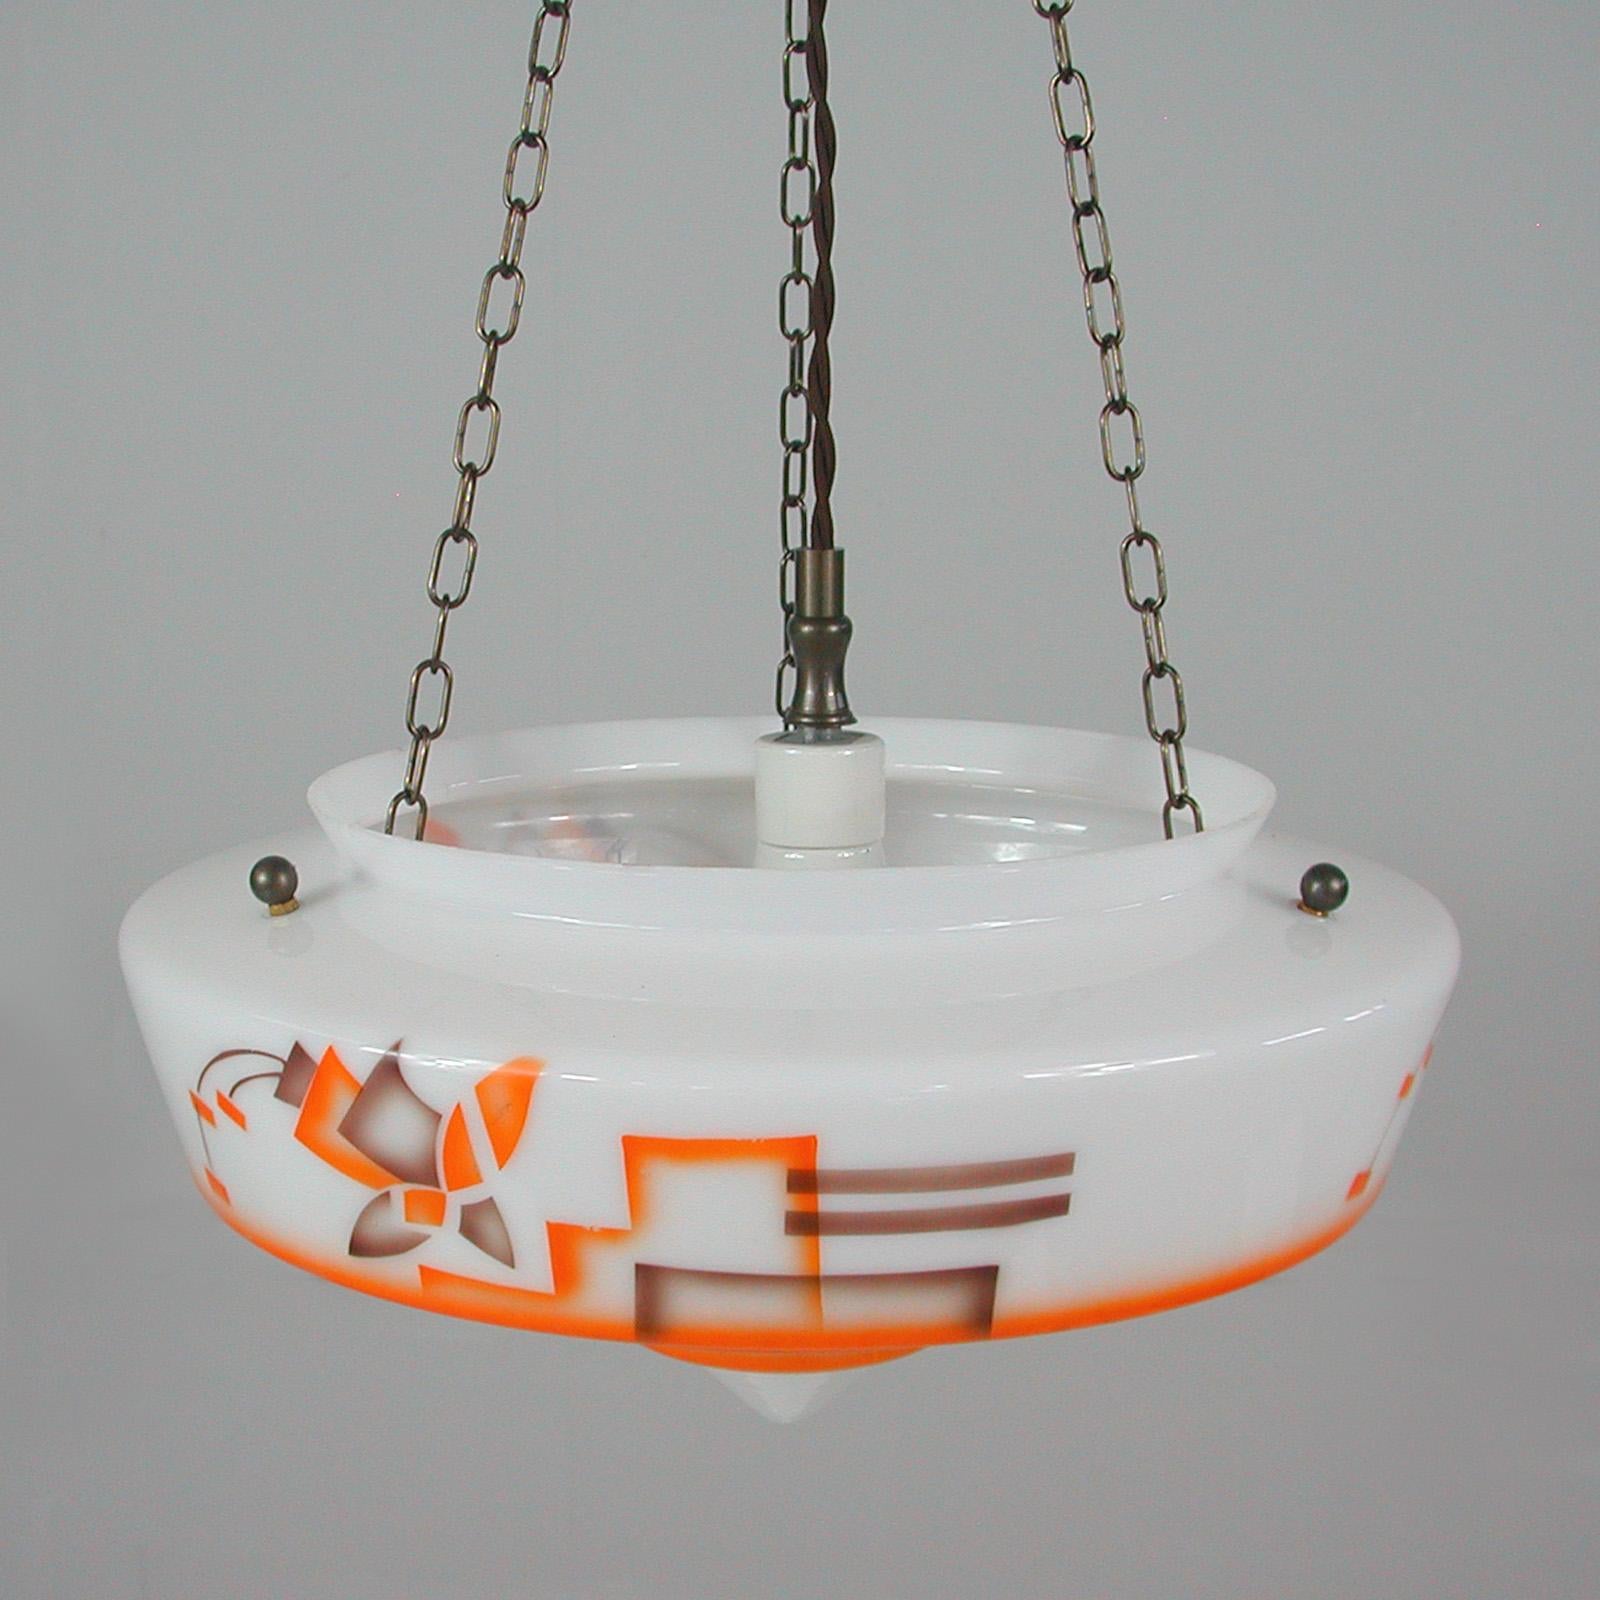 German Art Deco Suspension Light, Enameled Glass and Brass, 1930s For Sale 5